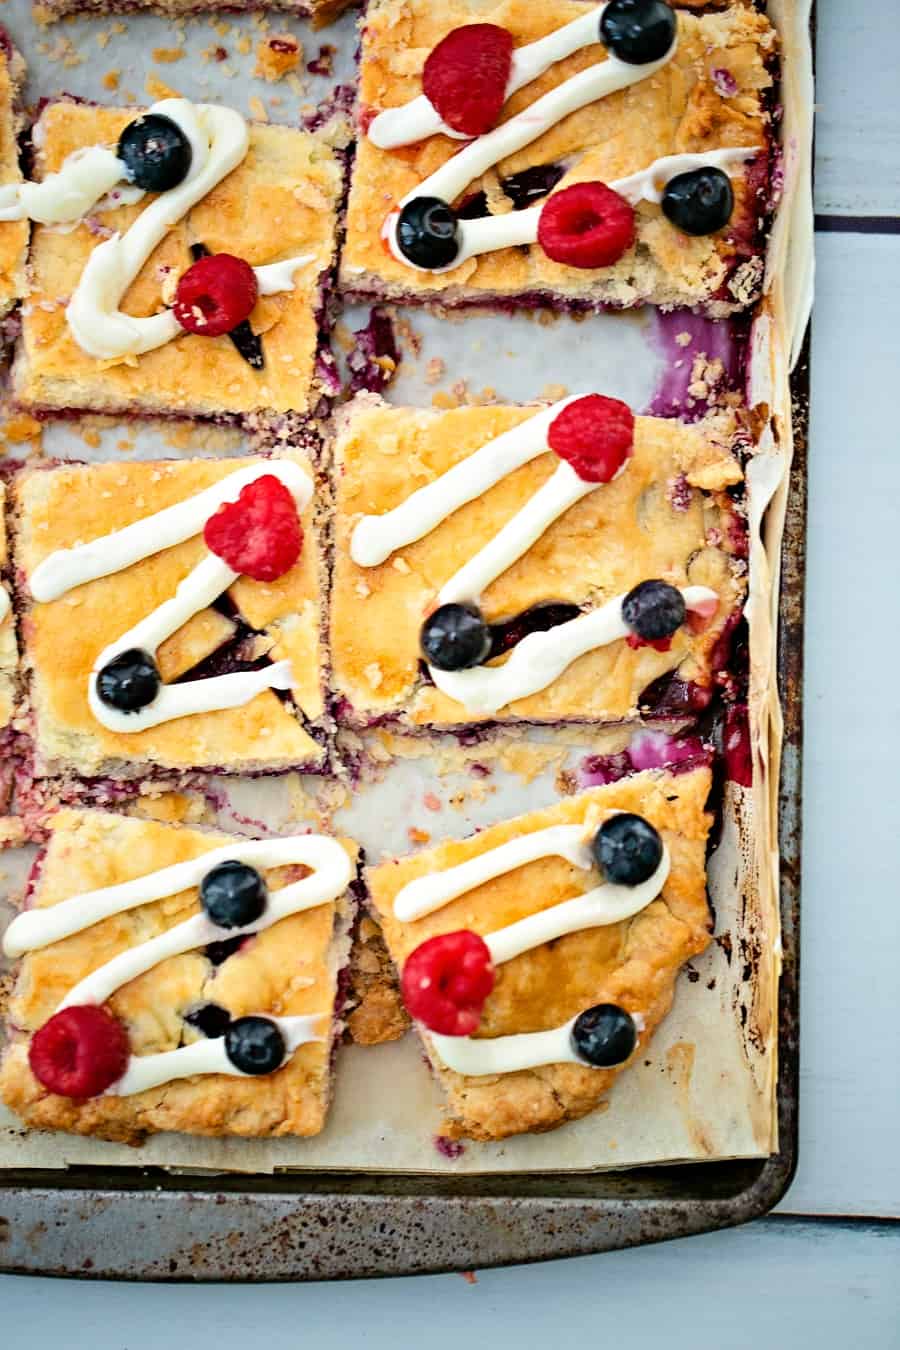 Raspberry Blueberry Slab Pie with a cream cheese frosting drizzle garnished with fresh berries. Delicious and easy patriotic dessert for Memorial Day or Fourth of July. 